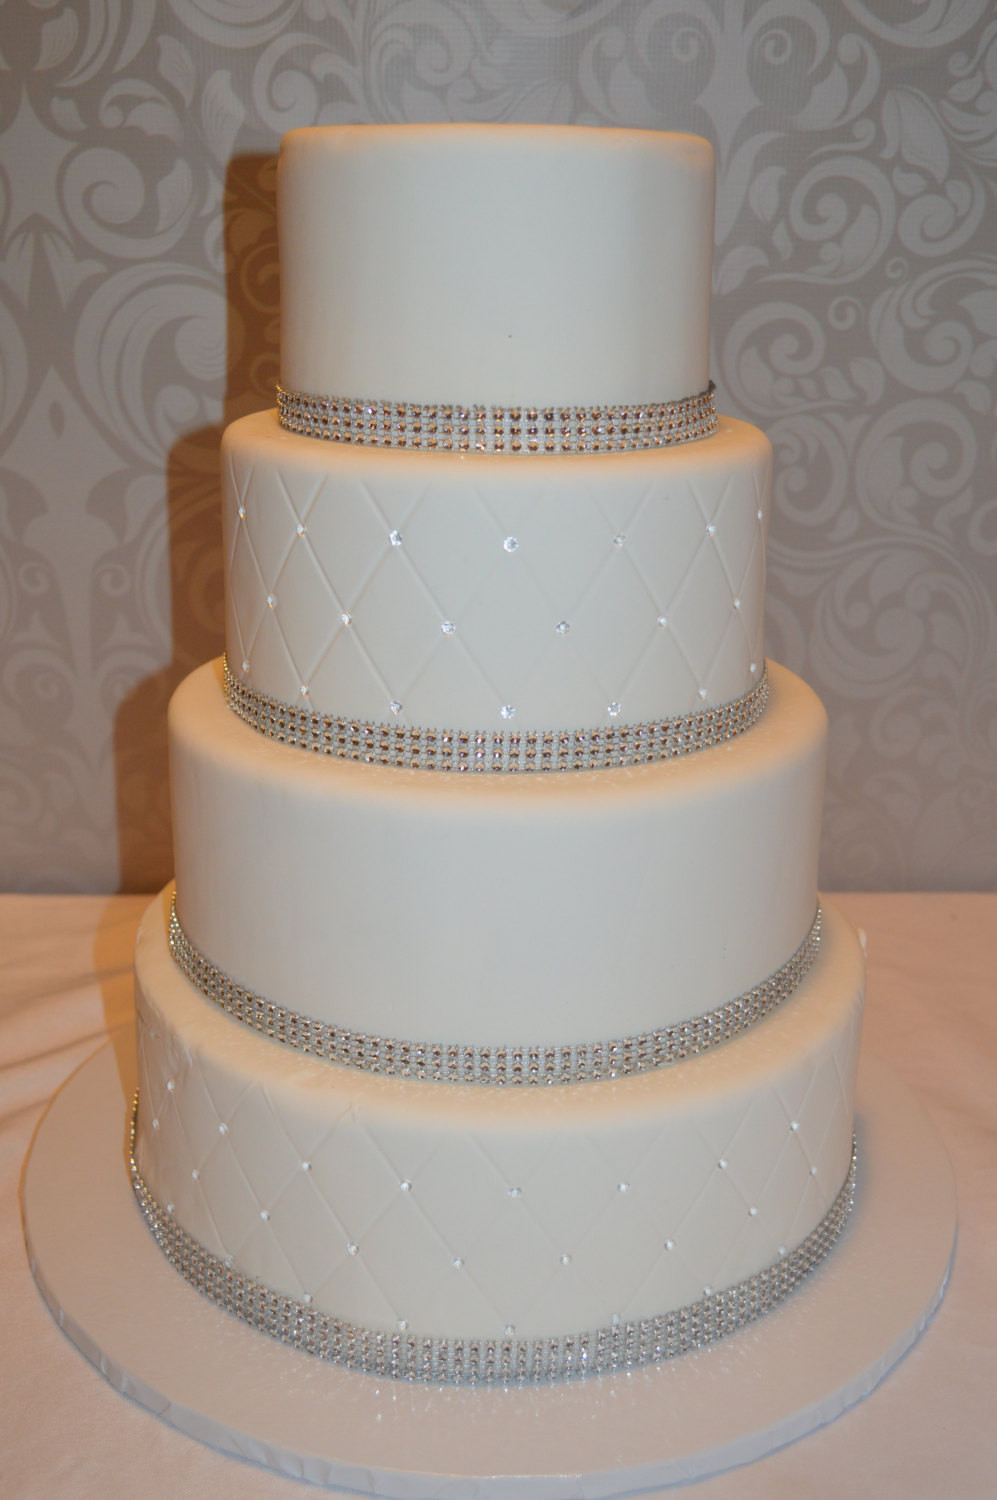 Wedding Cake Recipes For Tiered Cakes
 Four Tier Fondant Faux Wedding Cake Fake Wedding Cake